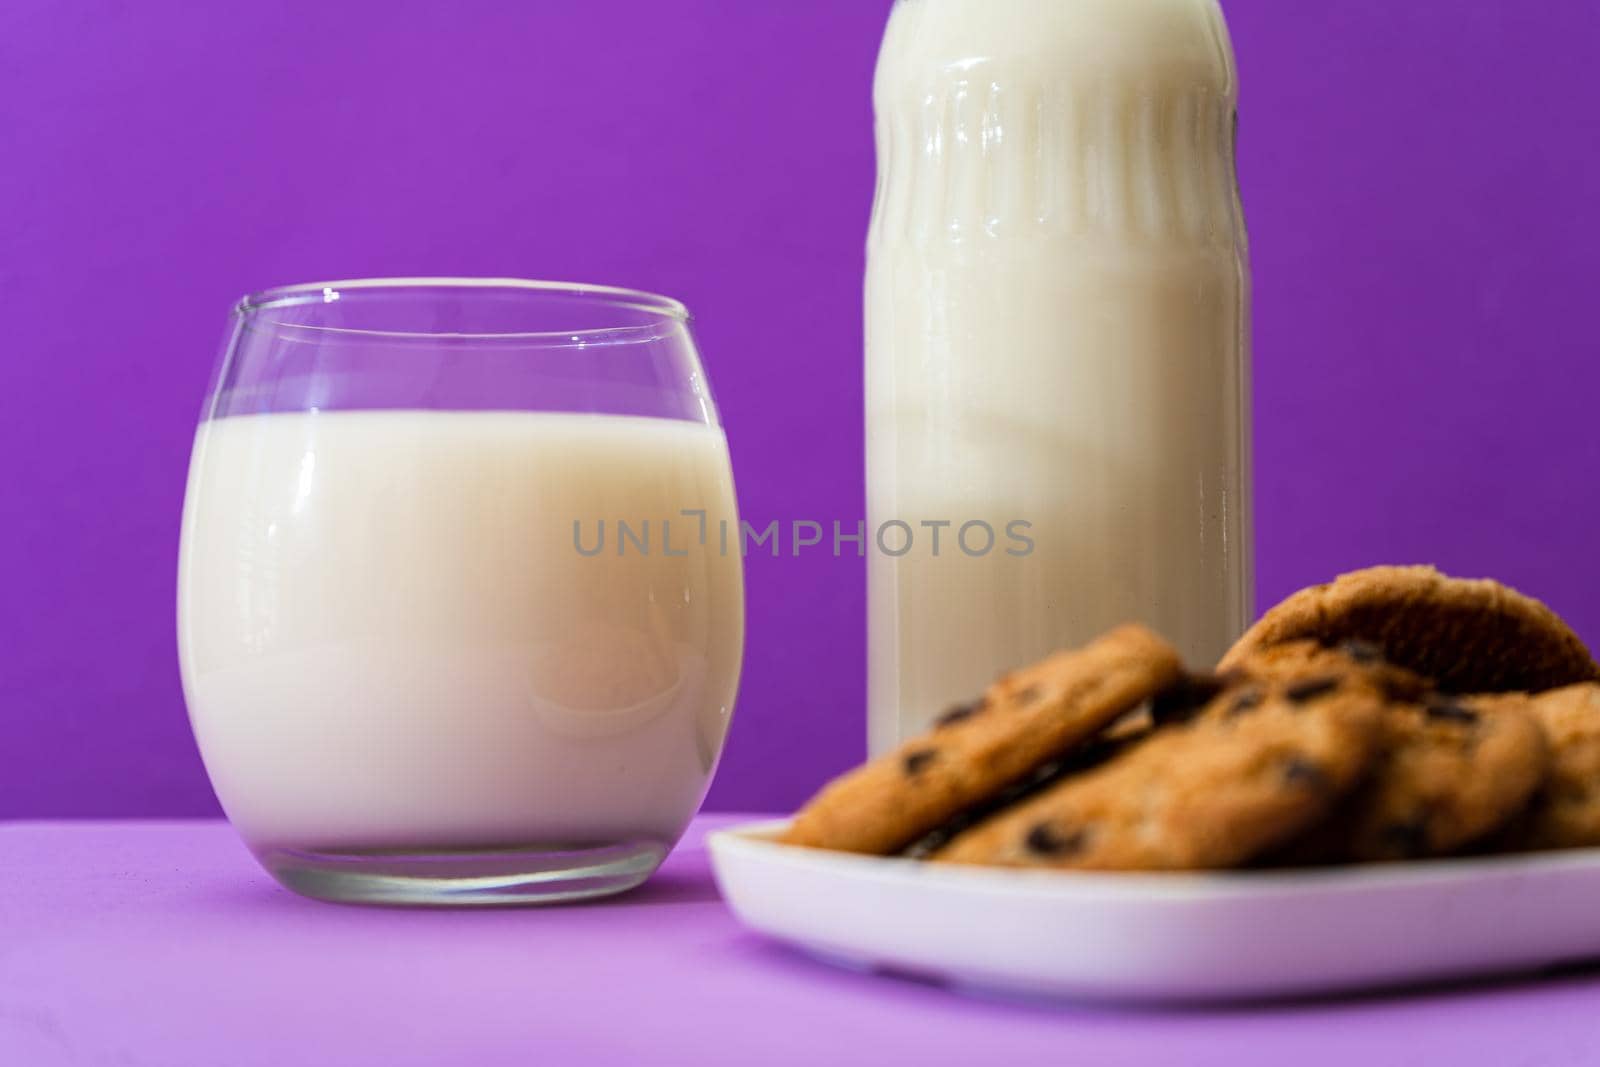 Close-up of a Glass bottle and large glass with milk and some sweet chocolate chip cookies in a purple or violet environment. Copy space.